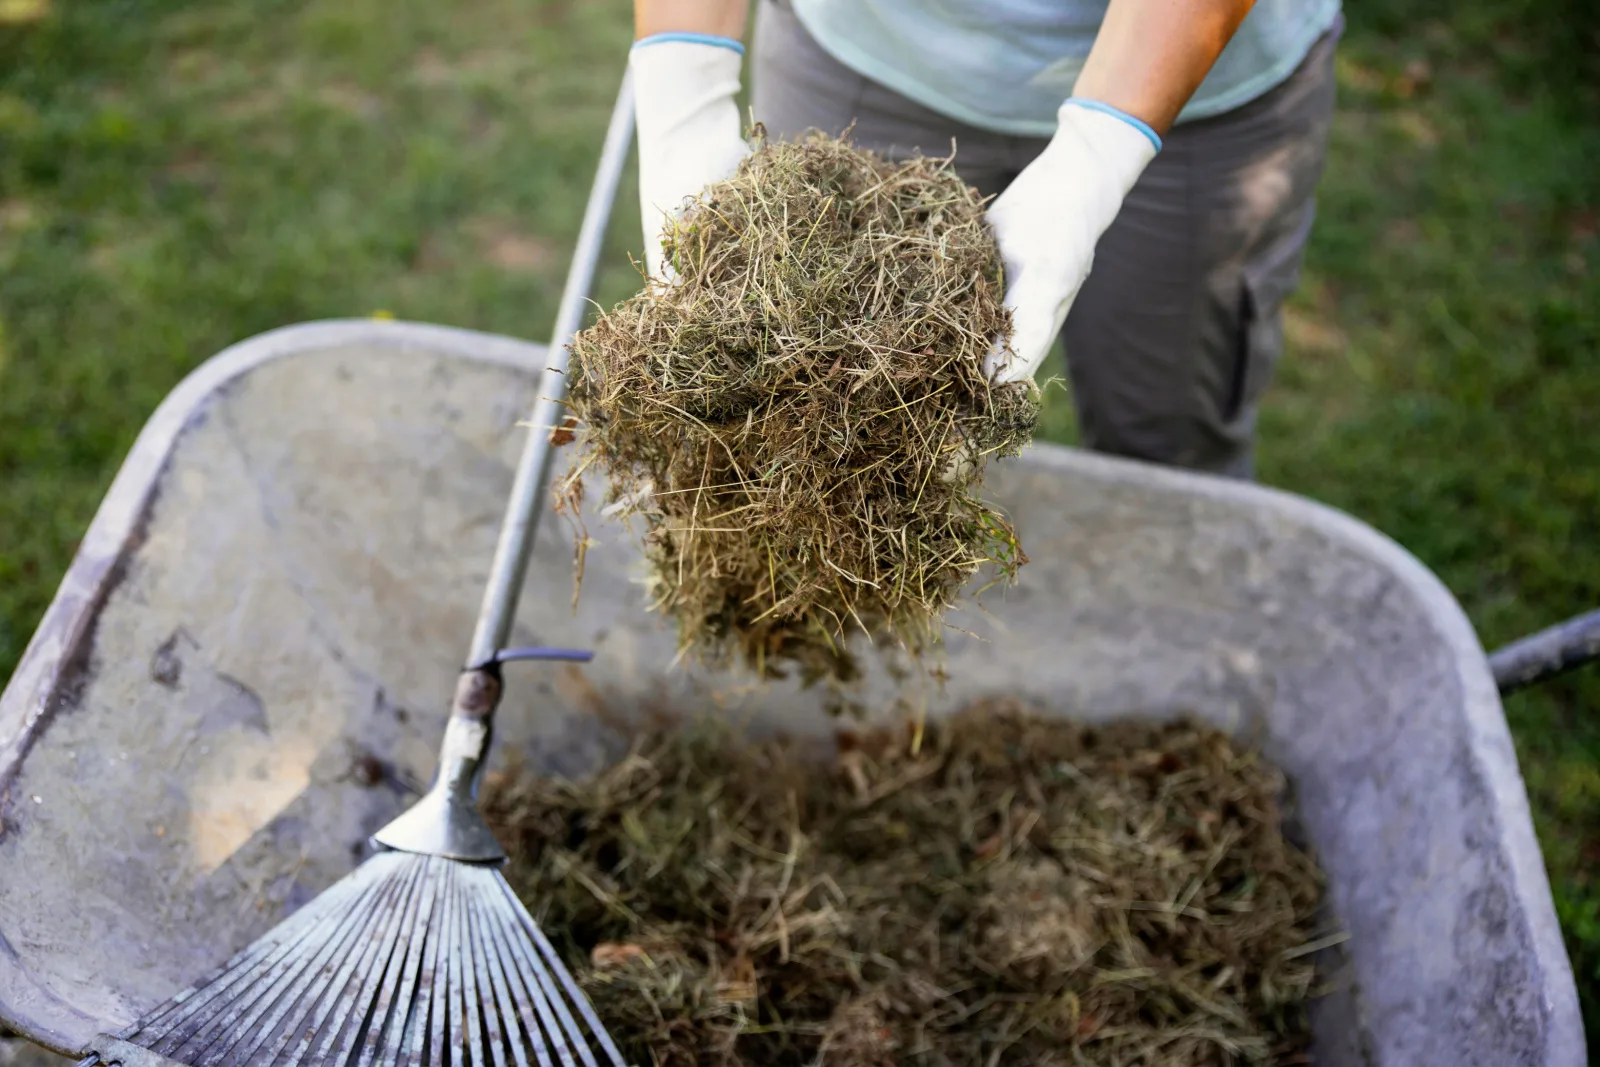 What To Do With Grass Clippings